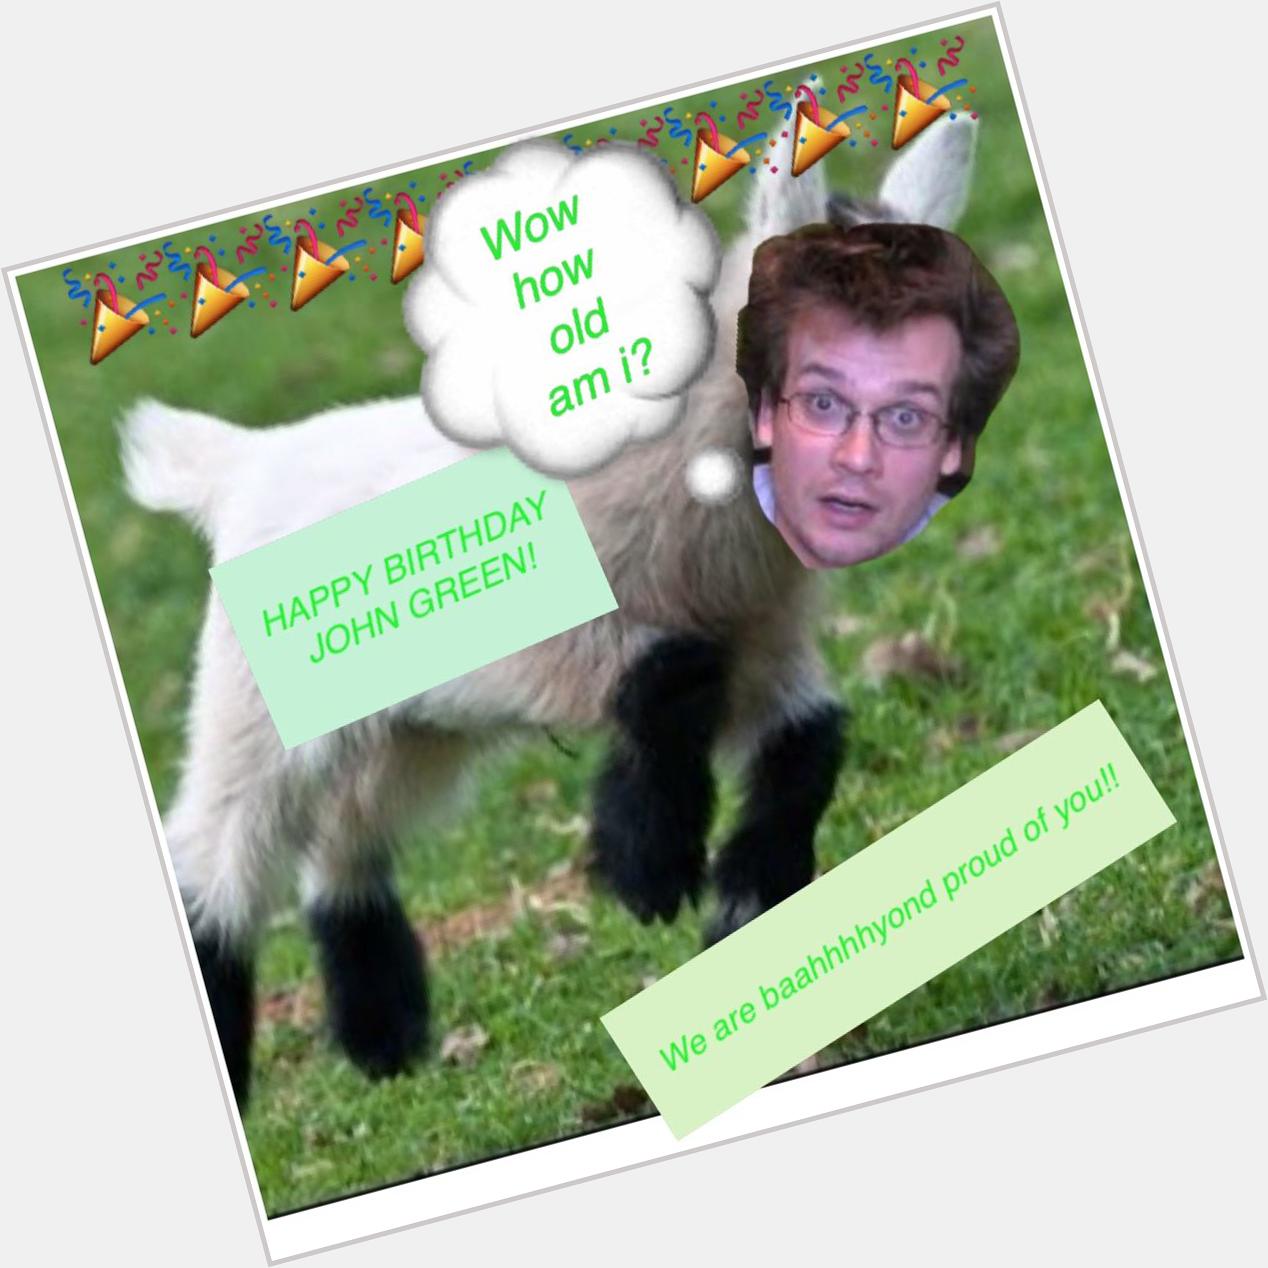 Happy Birthday to John Green!!Goat lover, author that can\t be duplicated unless human cloning was possible..!   